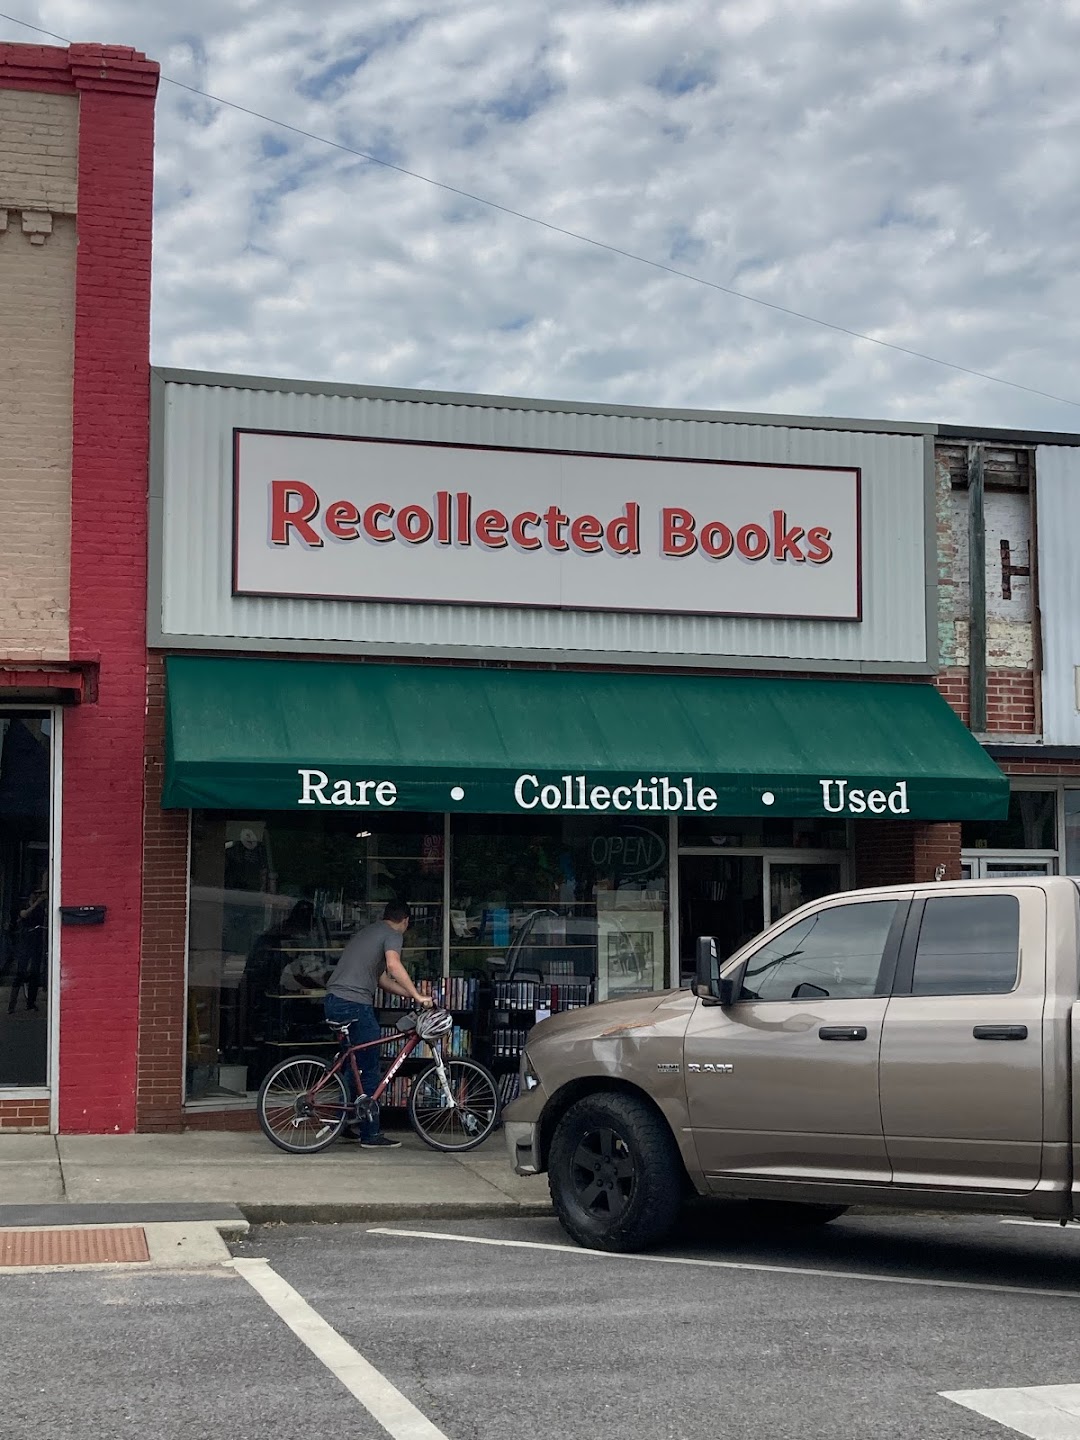 Recollected Books